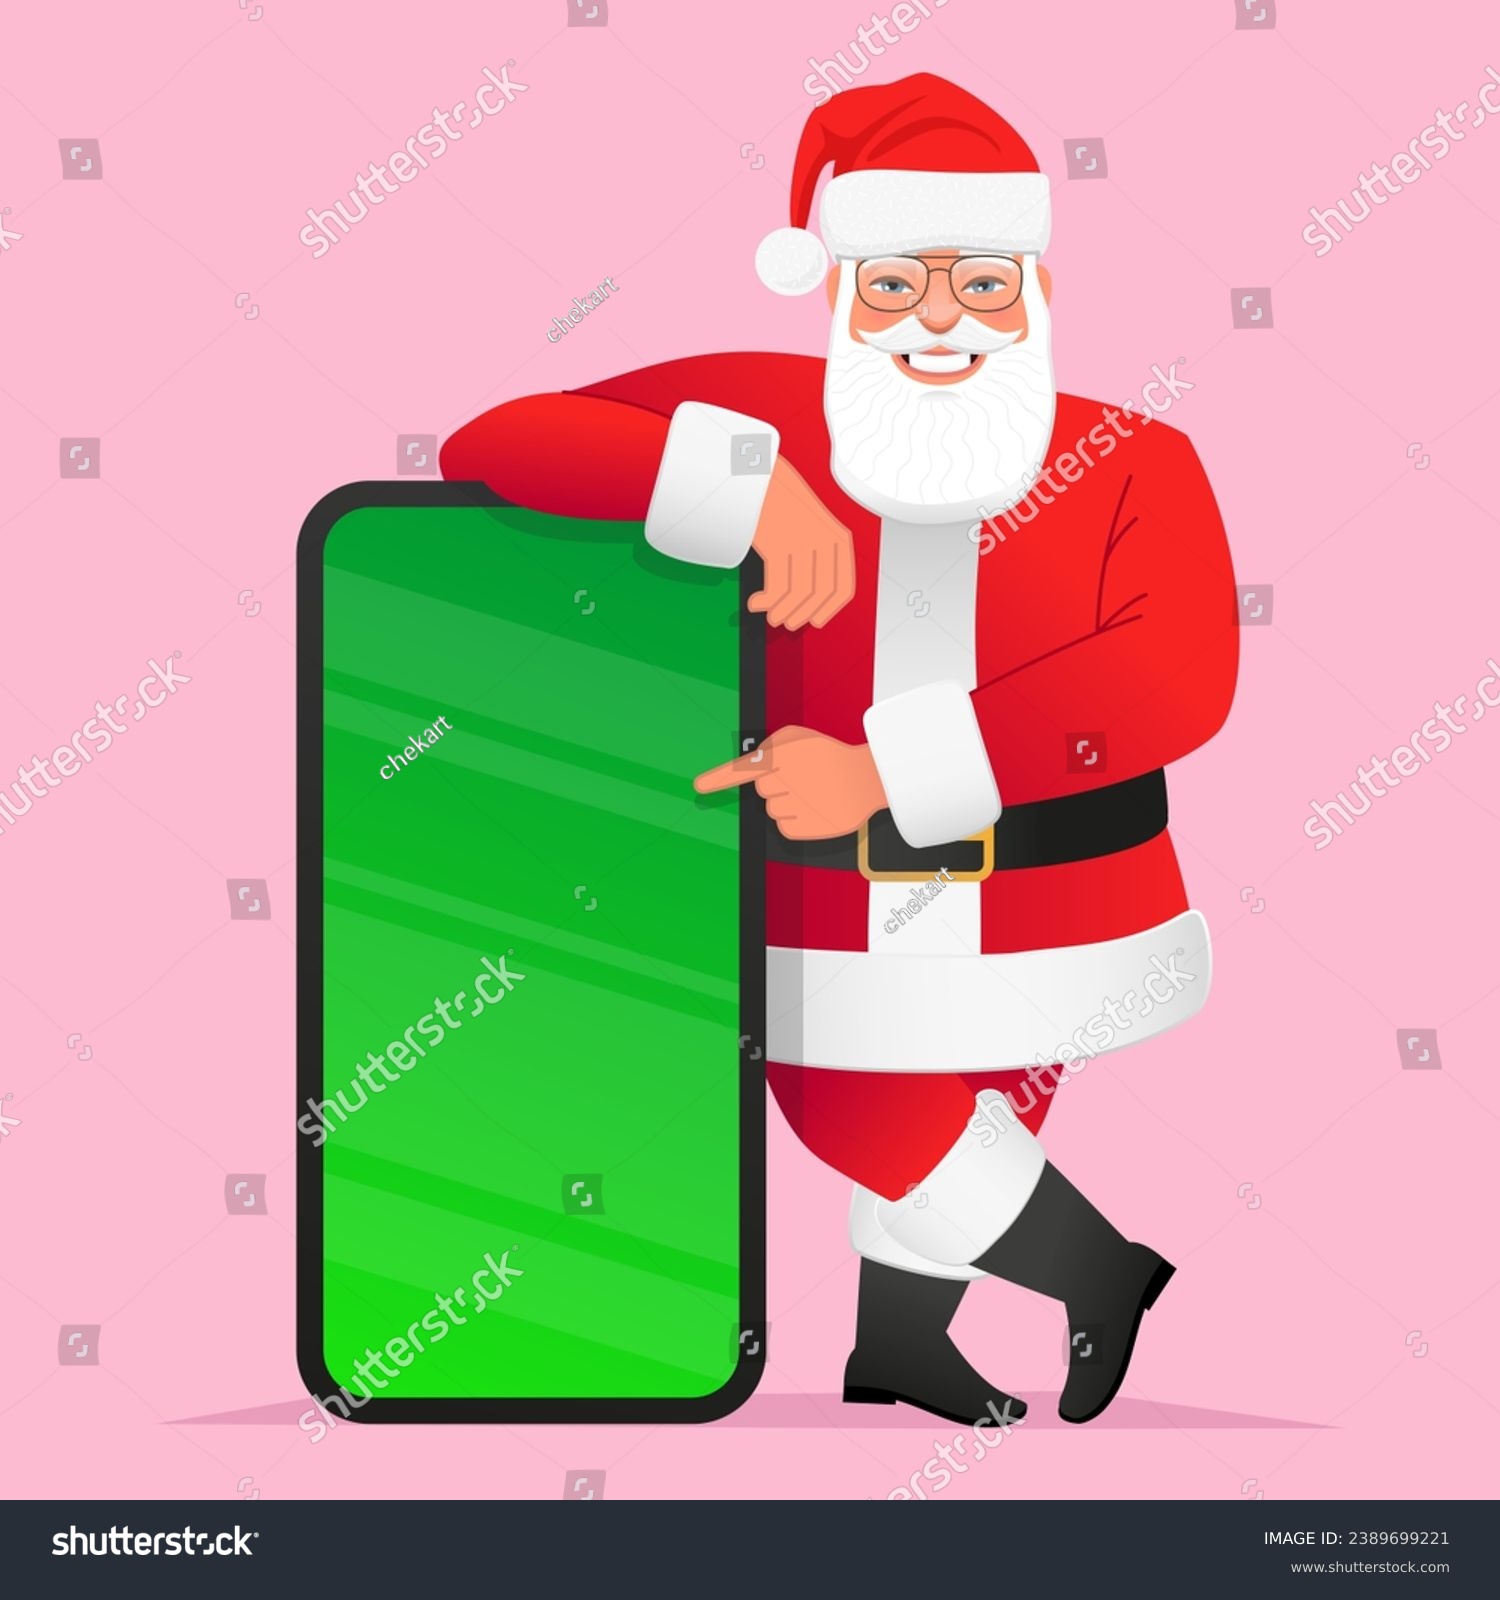 SVG of Happy Santa Claus with glasses is standing next to a large smartphone with a chroma key. Cartoon Santa points to the mobile phone screen. New Year's concept for advertising a mobile application. svg